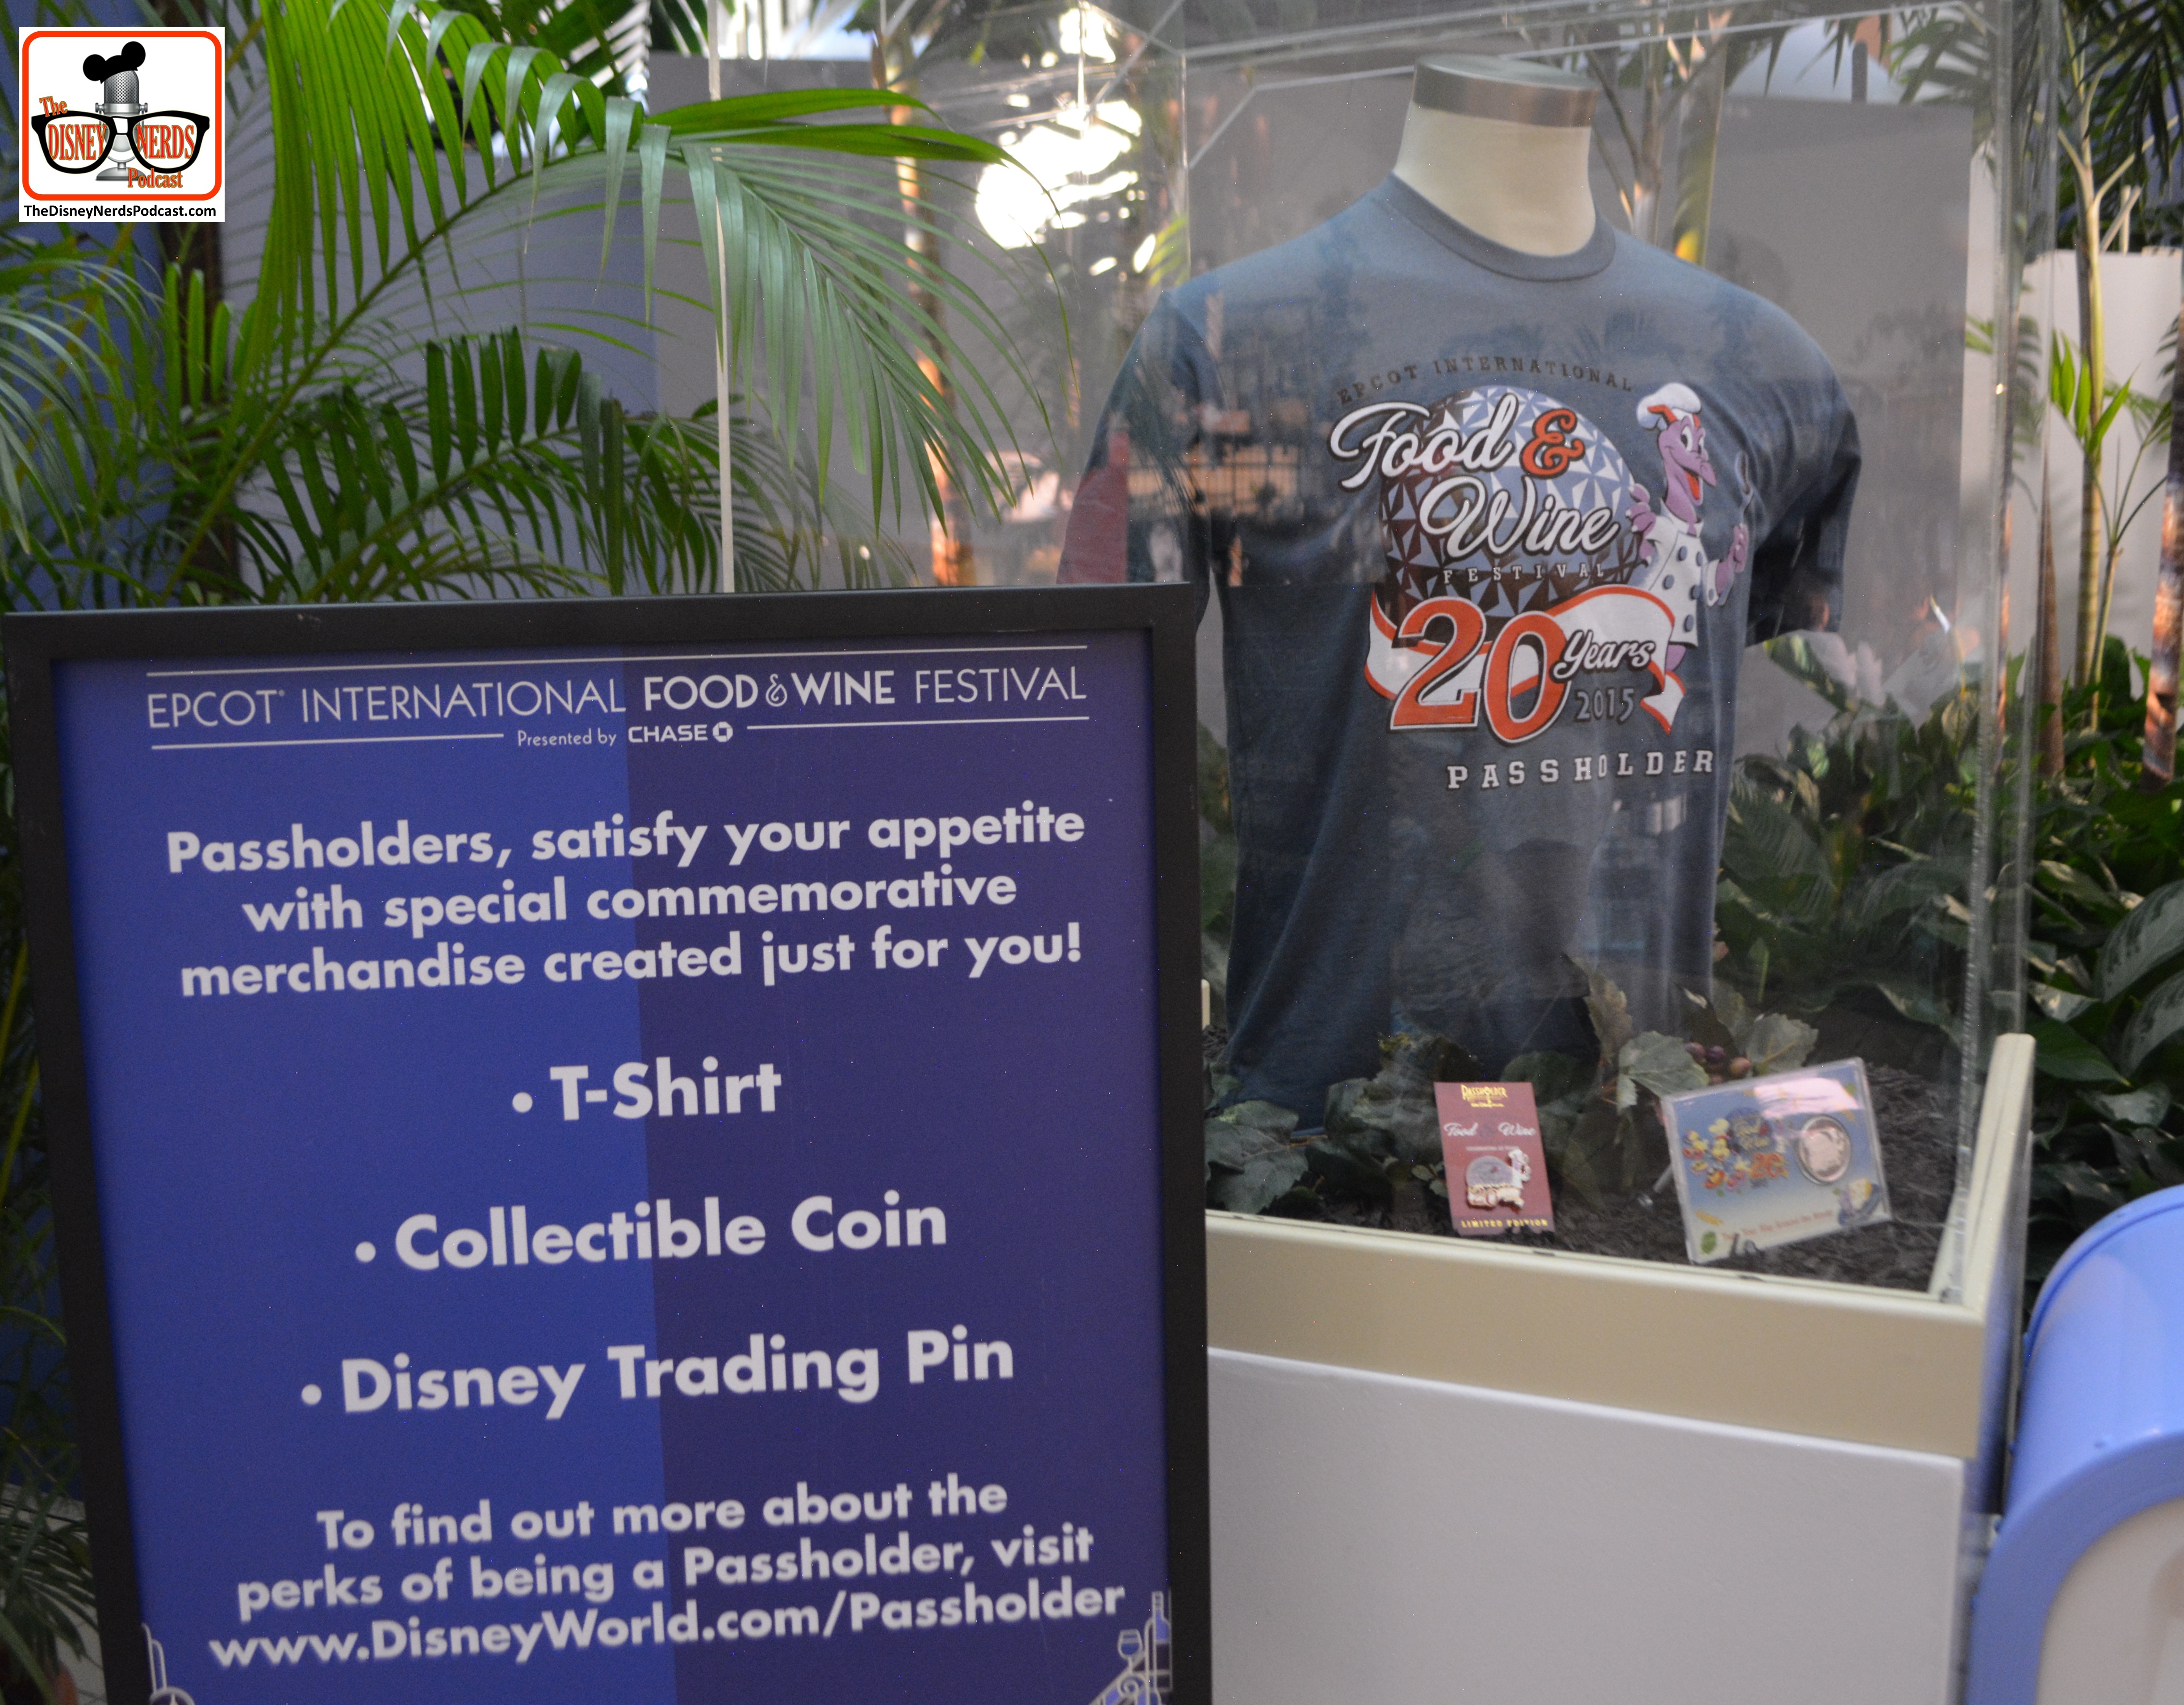 Limited Edition "Passholder" merchandise... T-Shirt - Coin and Pin. All sold out when I arrived...